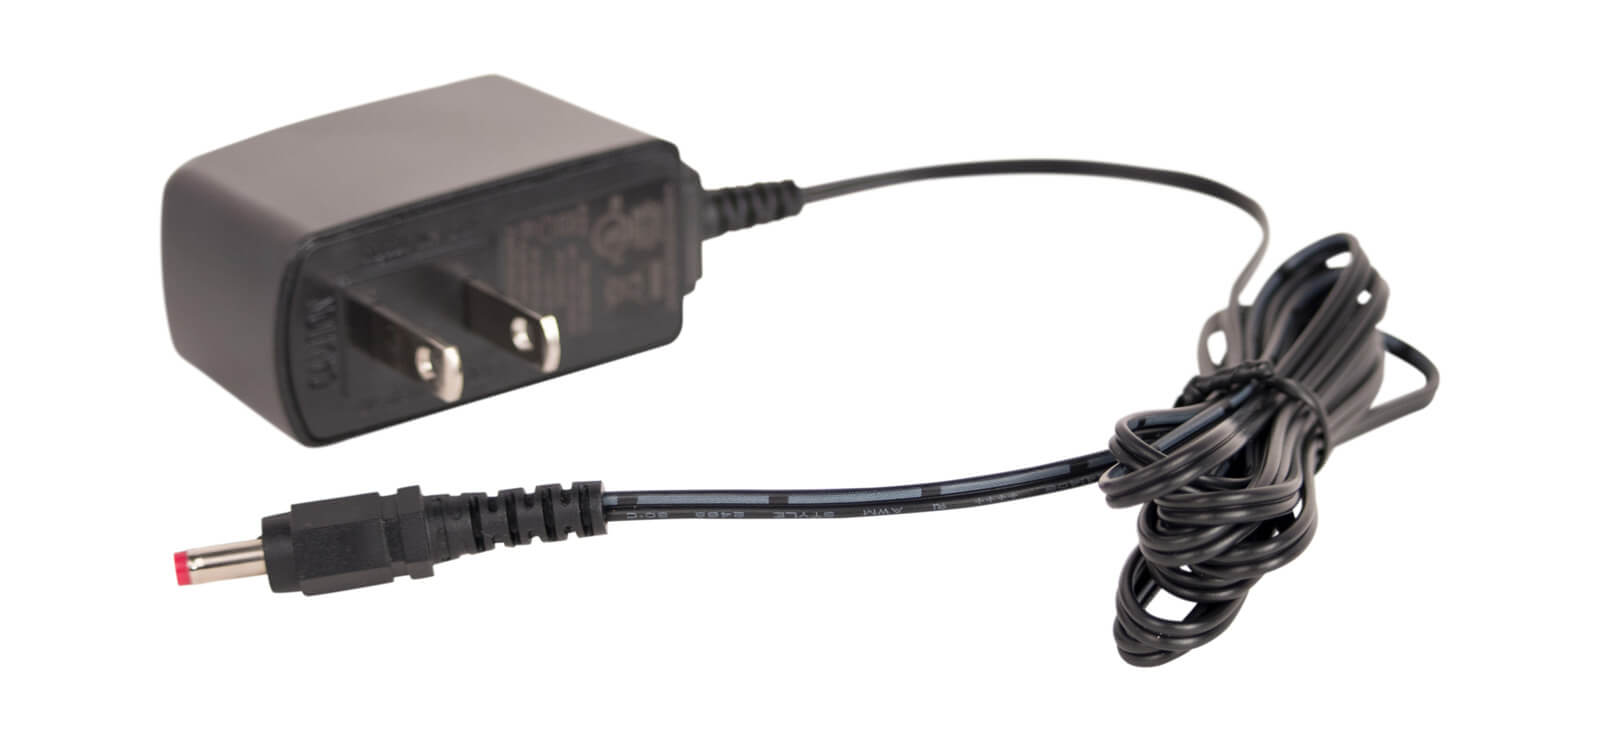 Home AC Power Adapter for SiriusXM™ Vehicle Cradles